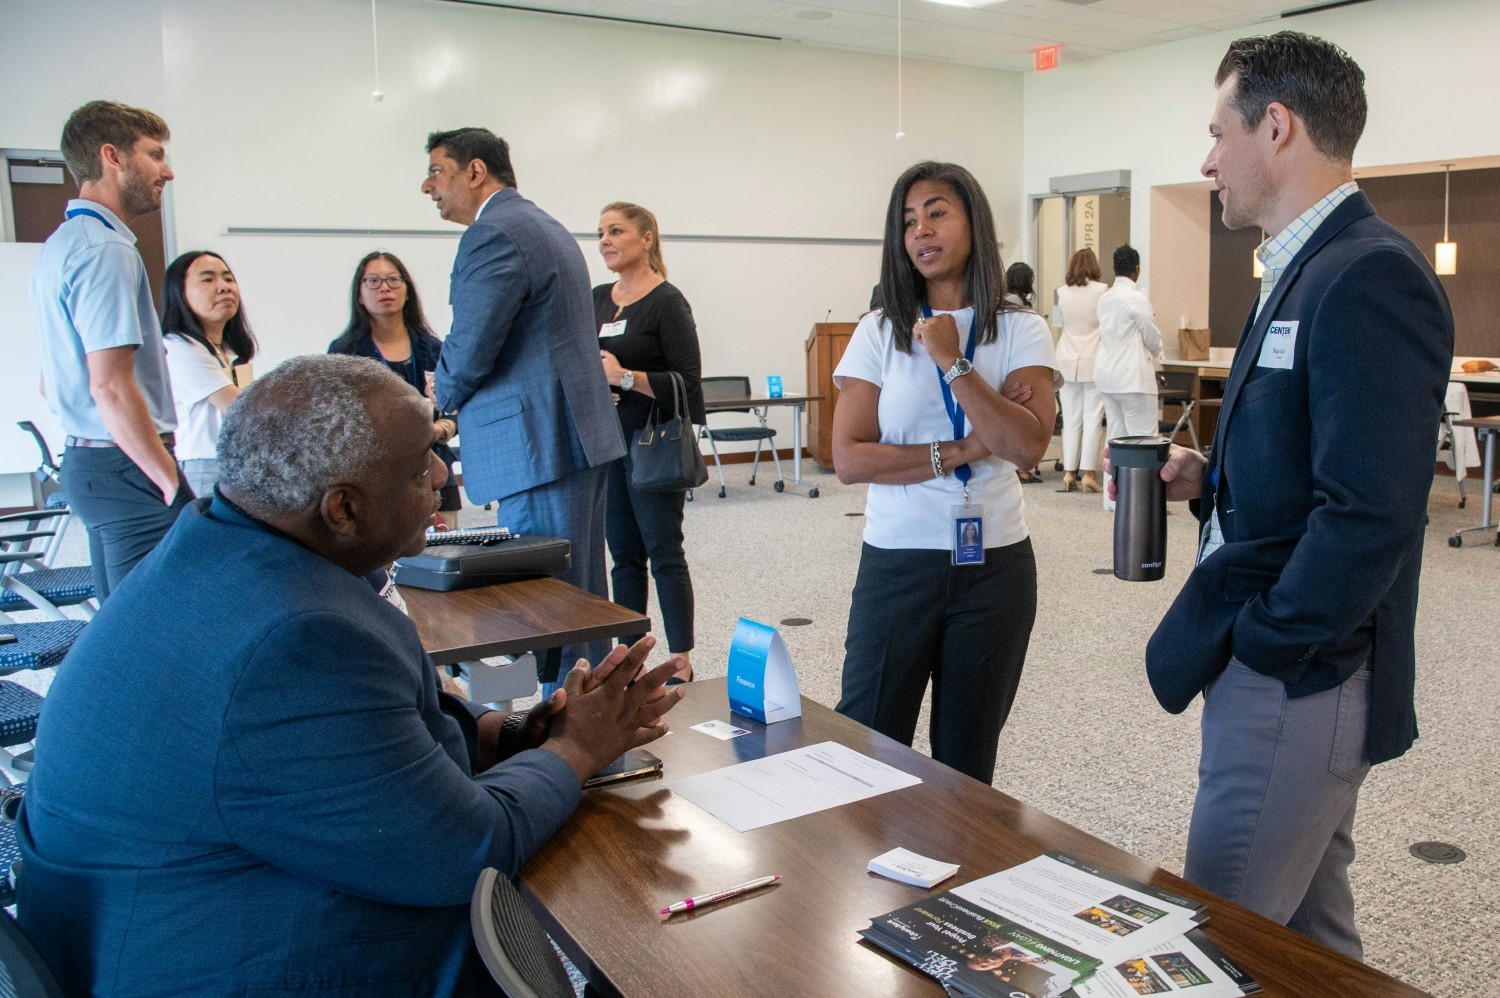 Centene hosted its first Supplier Diversity Summit to foster innovation and economic opportunity in the community.